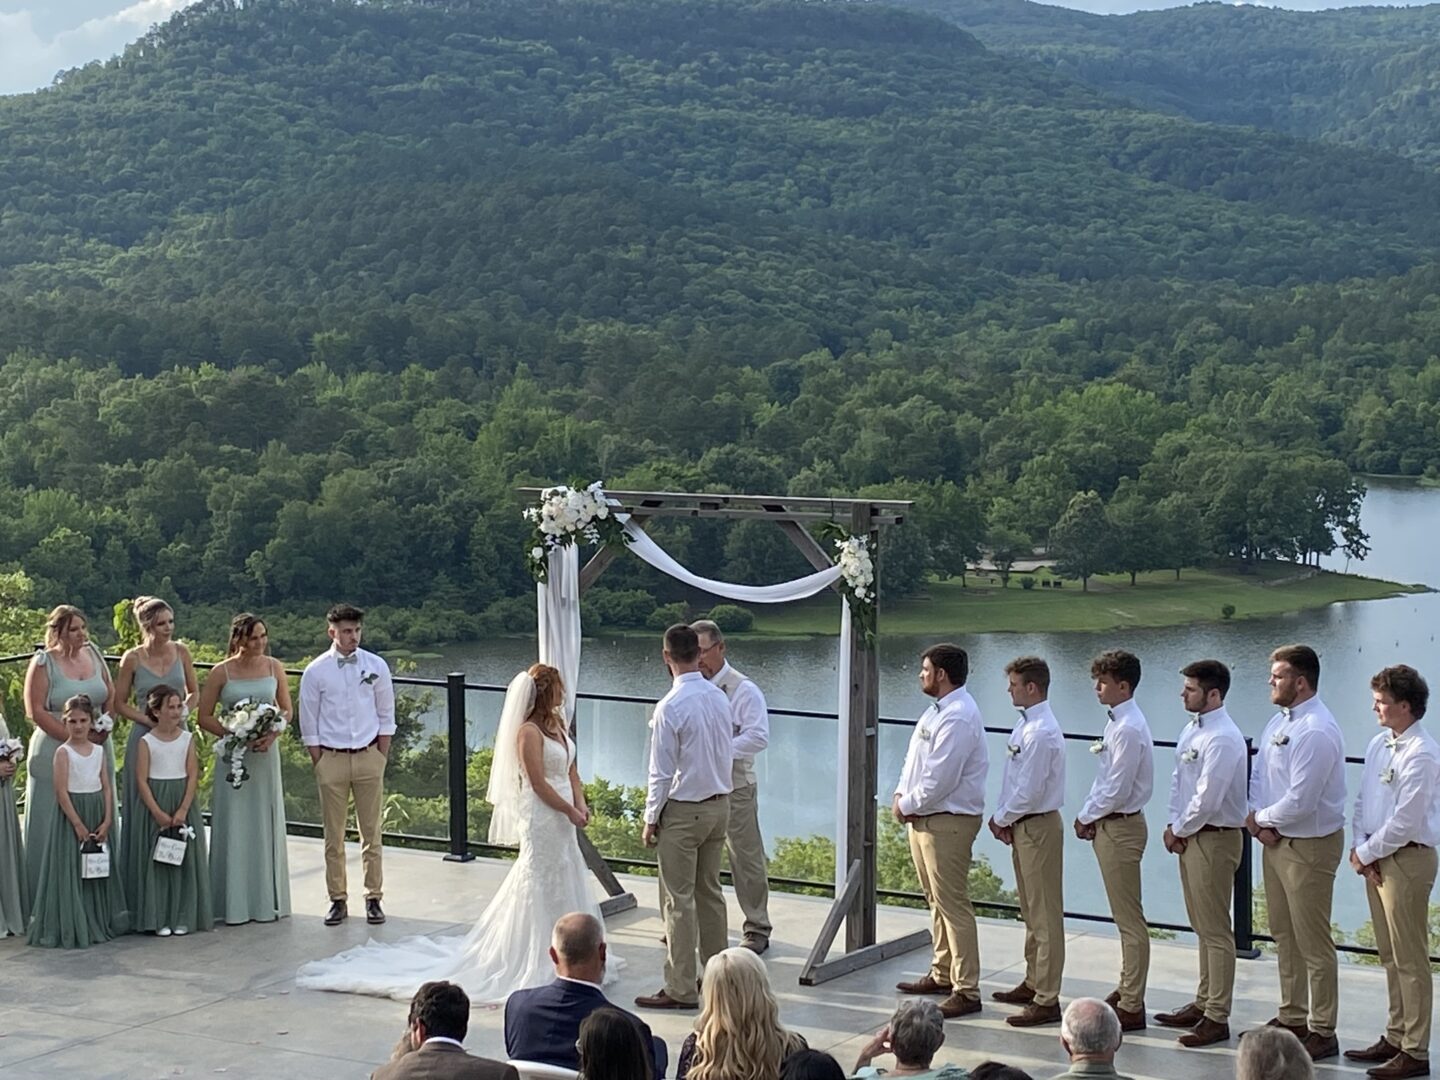 A wedding ceremony with a view of the mountains.